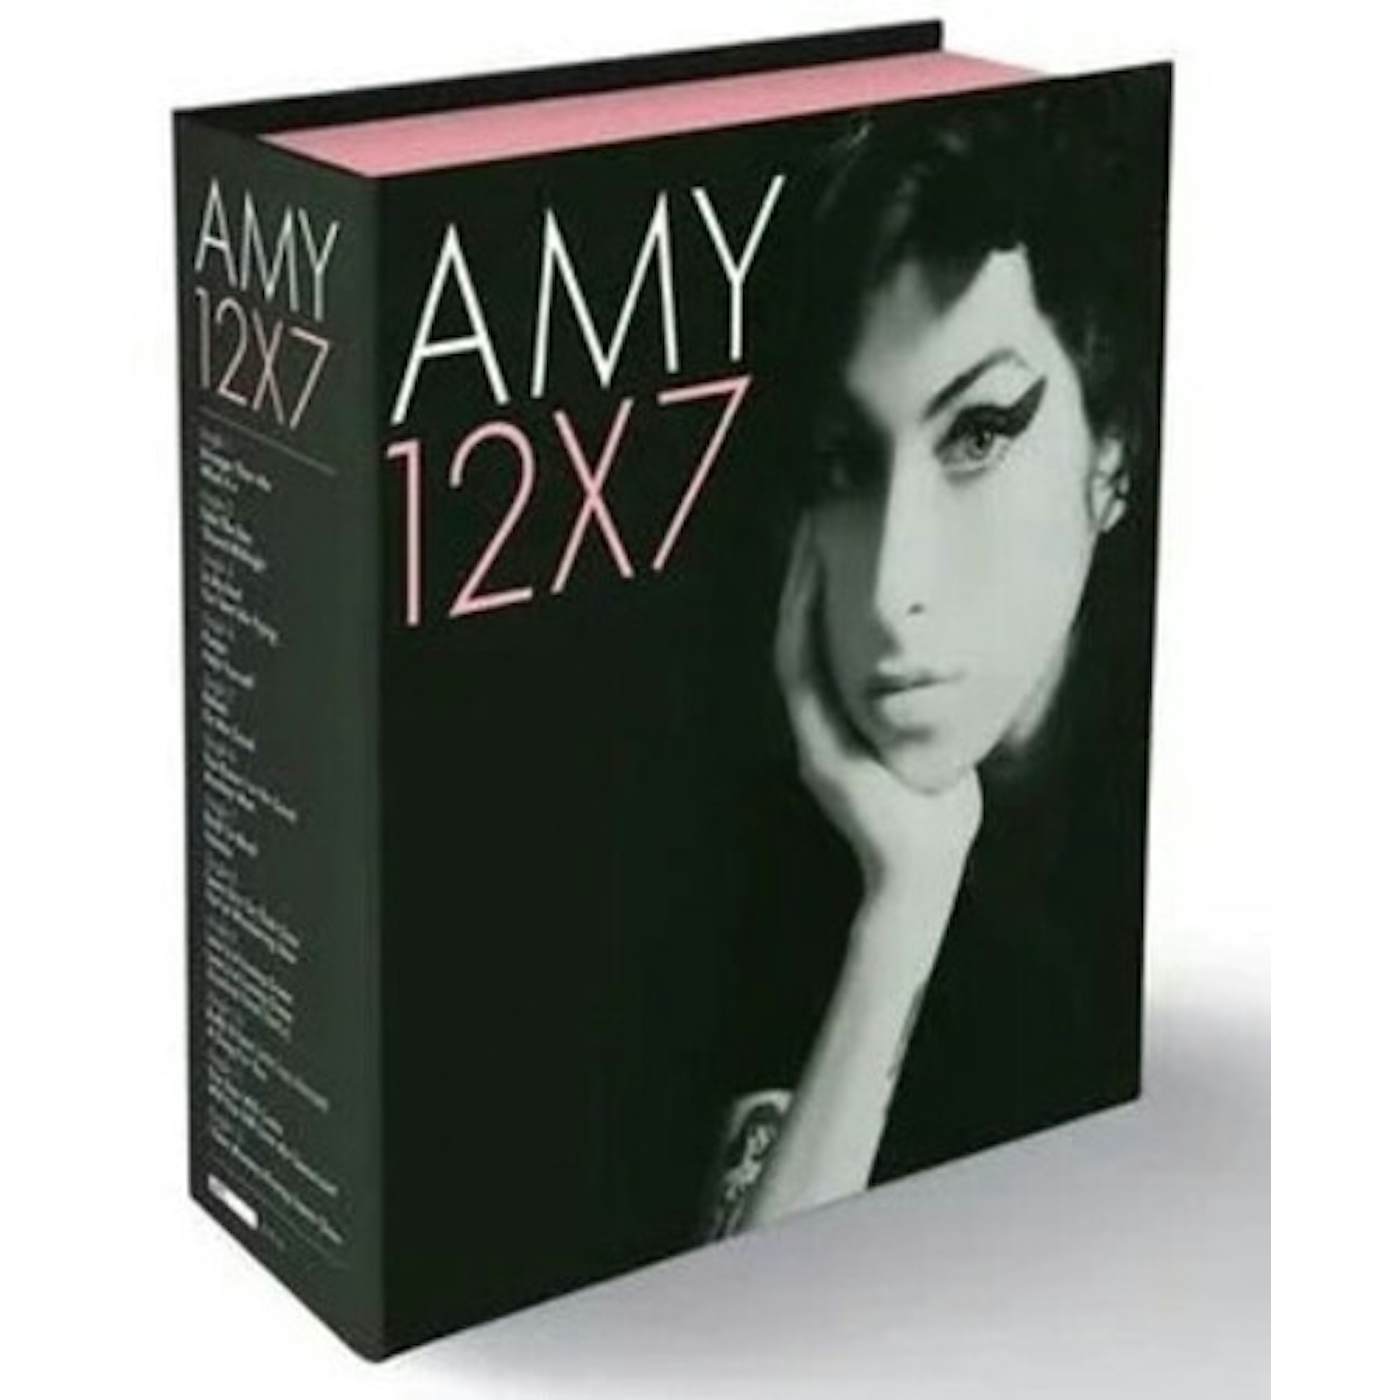 Amy Winehouse 12x7: The Singles Collection (Box Set) Vinyl Record